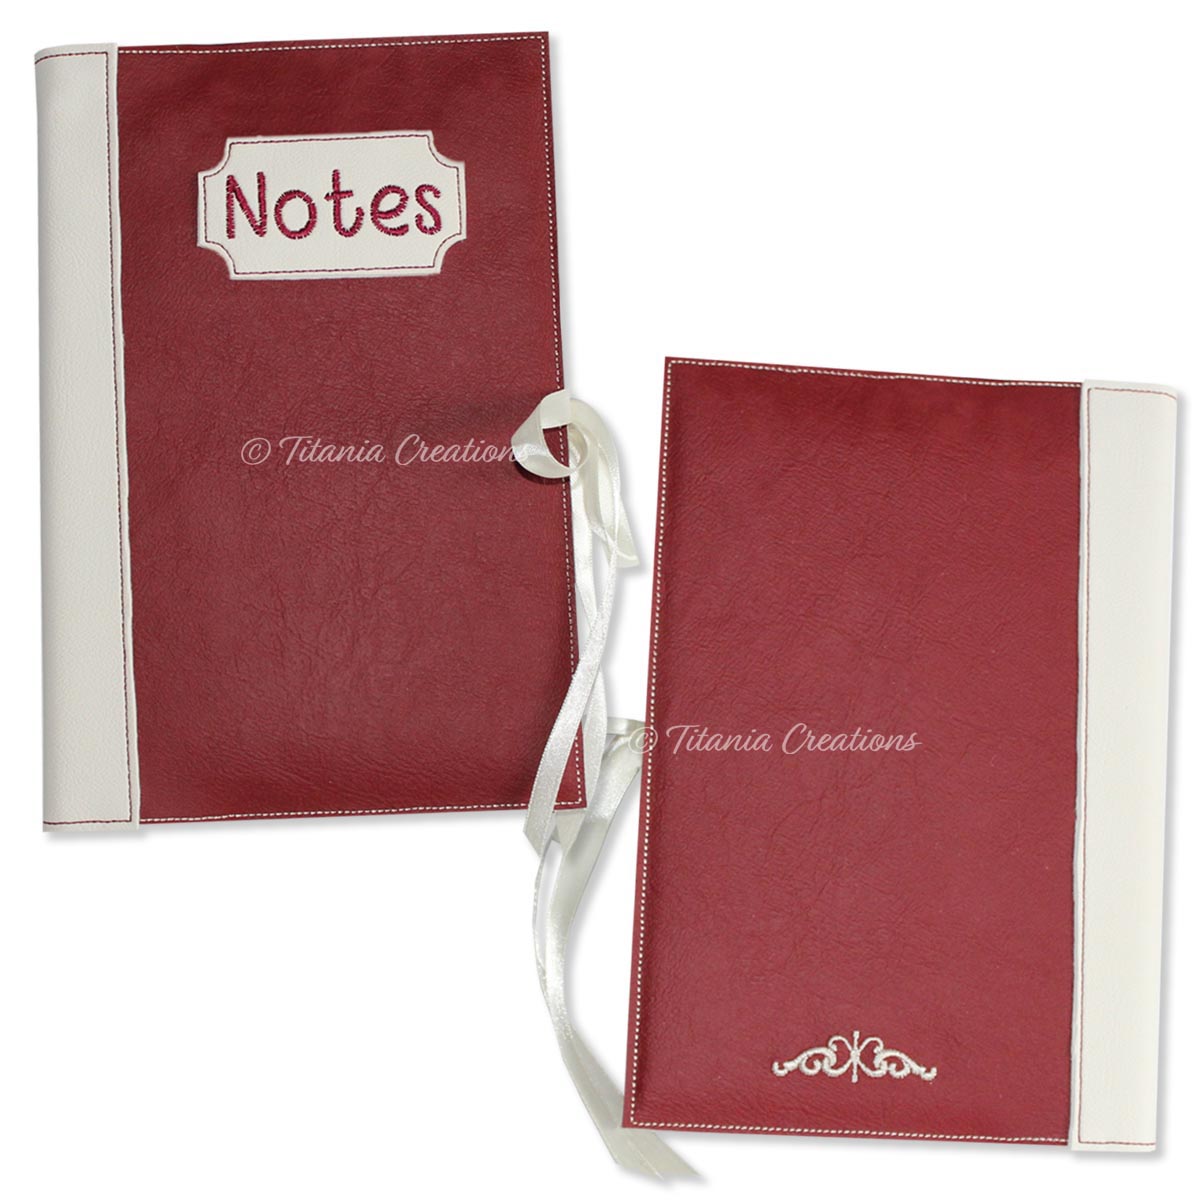 ITH A5 Note Book Cover 6x10